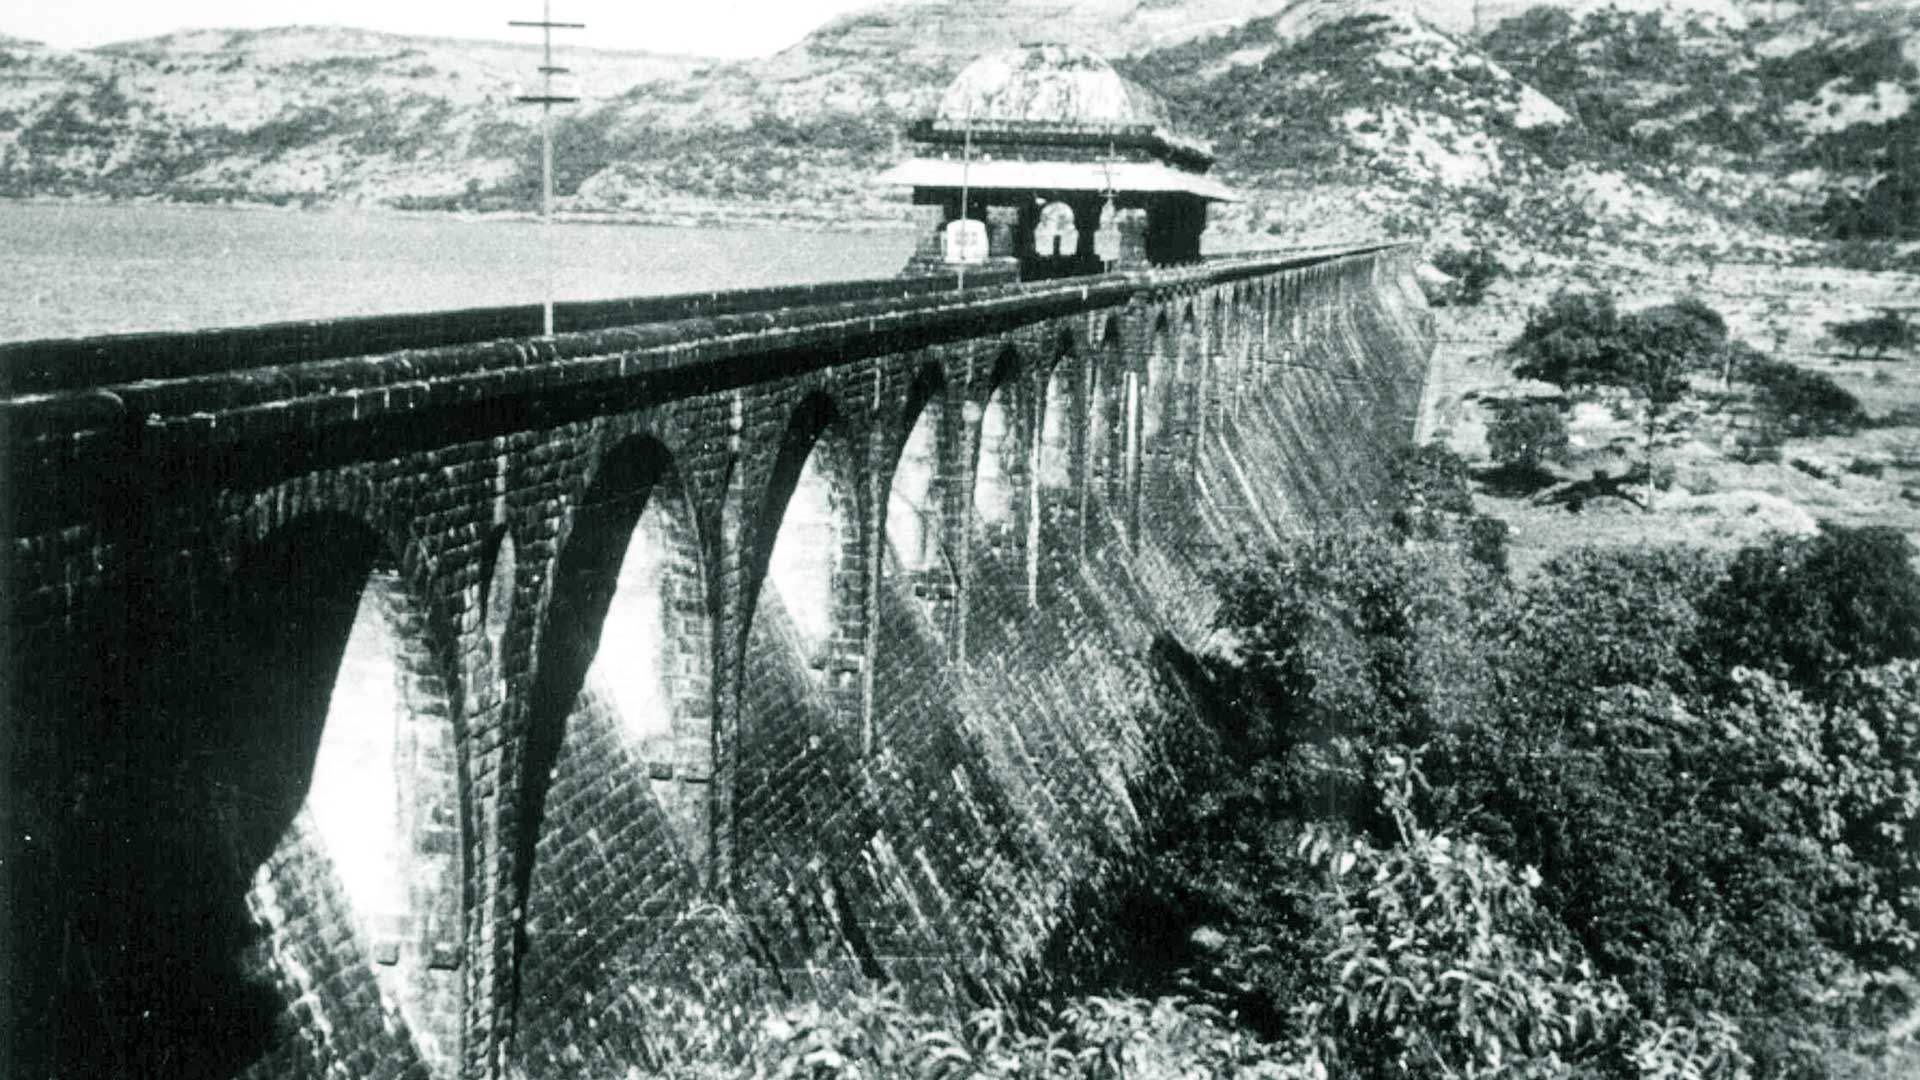 Tata Power was born of Jamsetji Tata's dream of harnessing flowing water to generate hydroelectricity